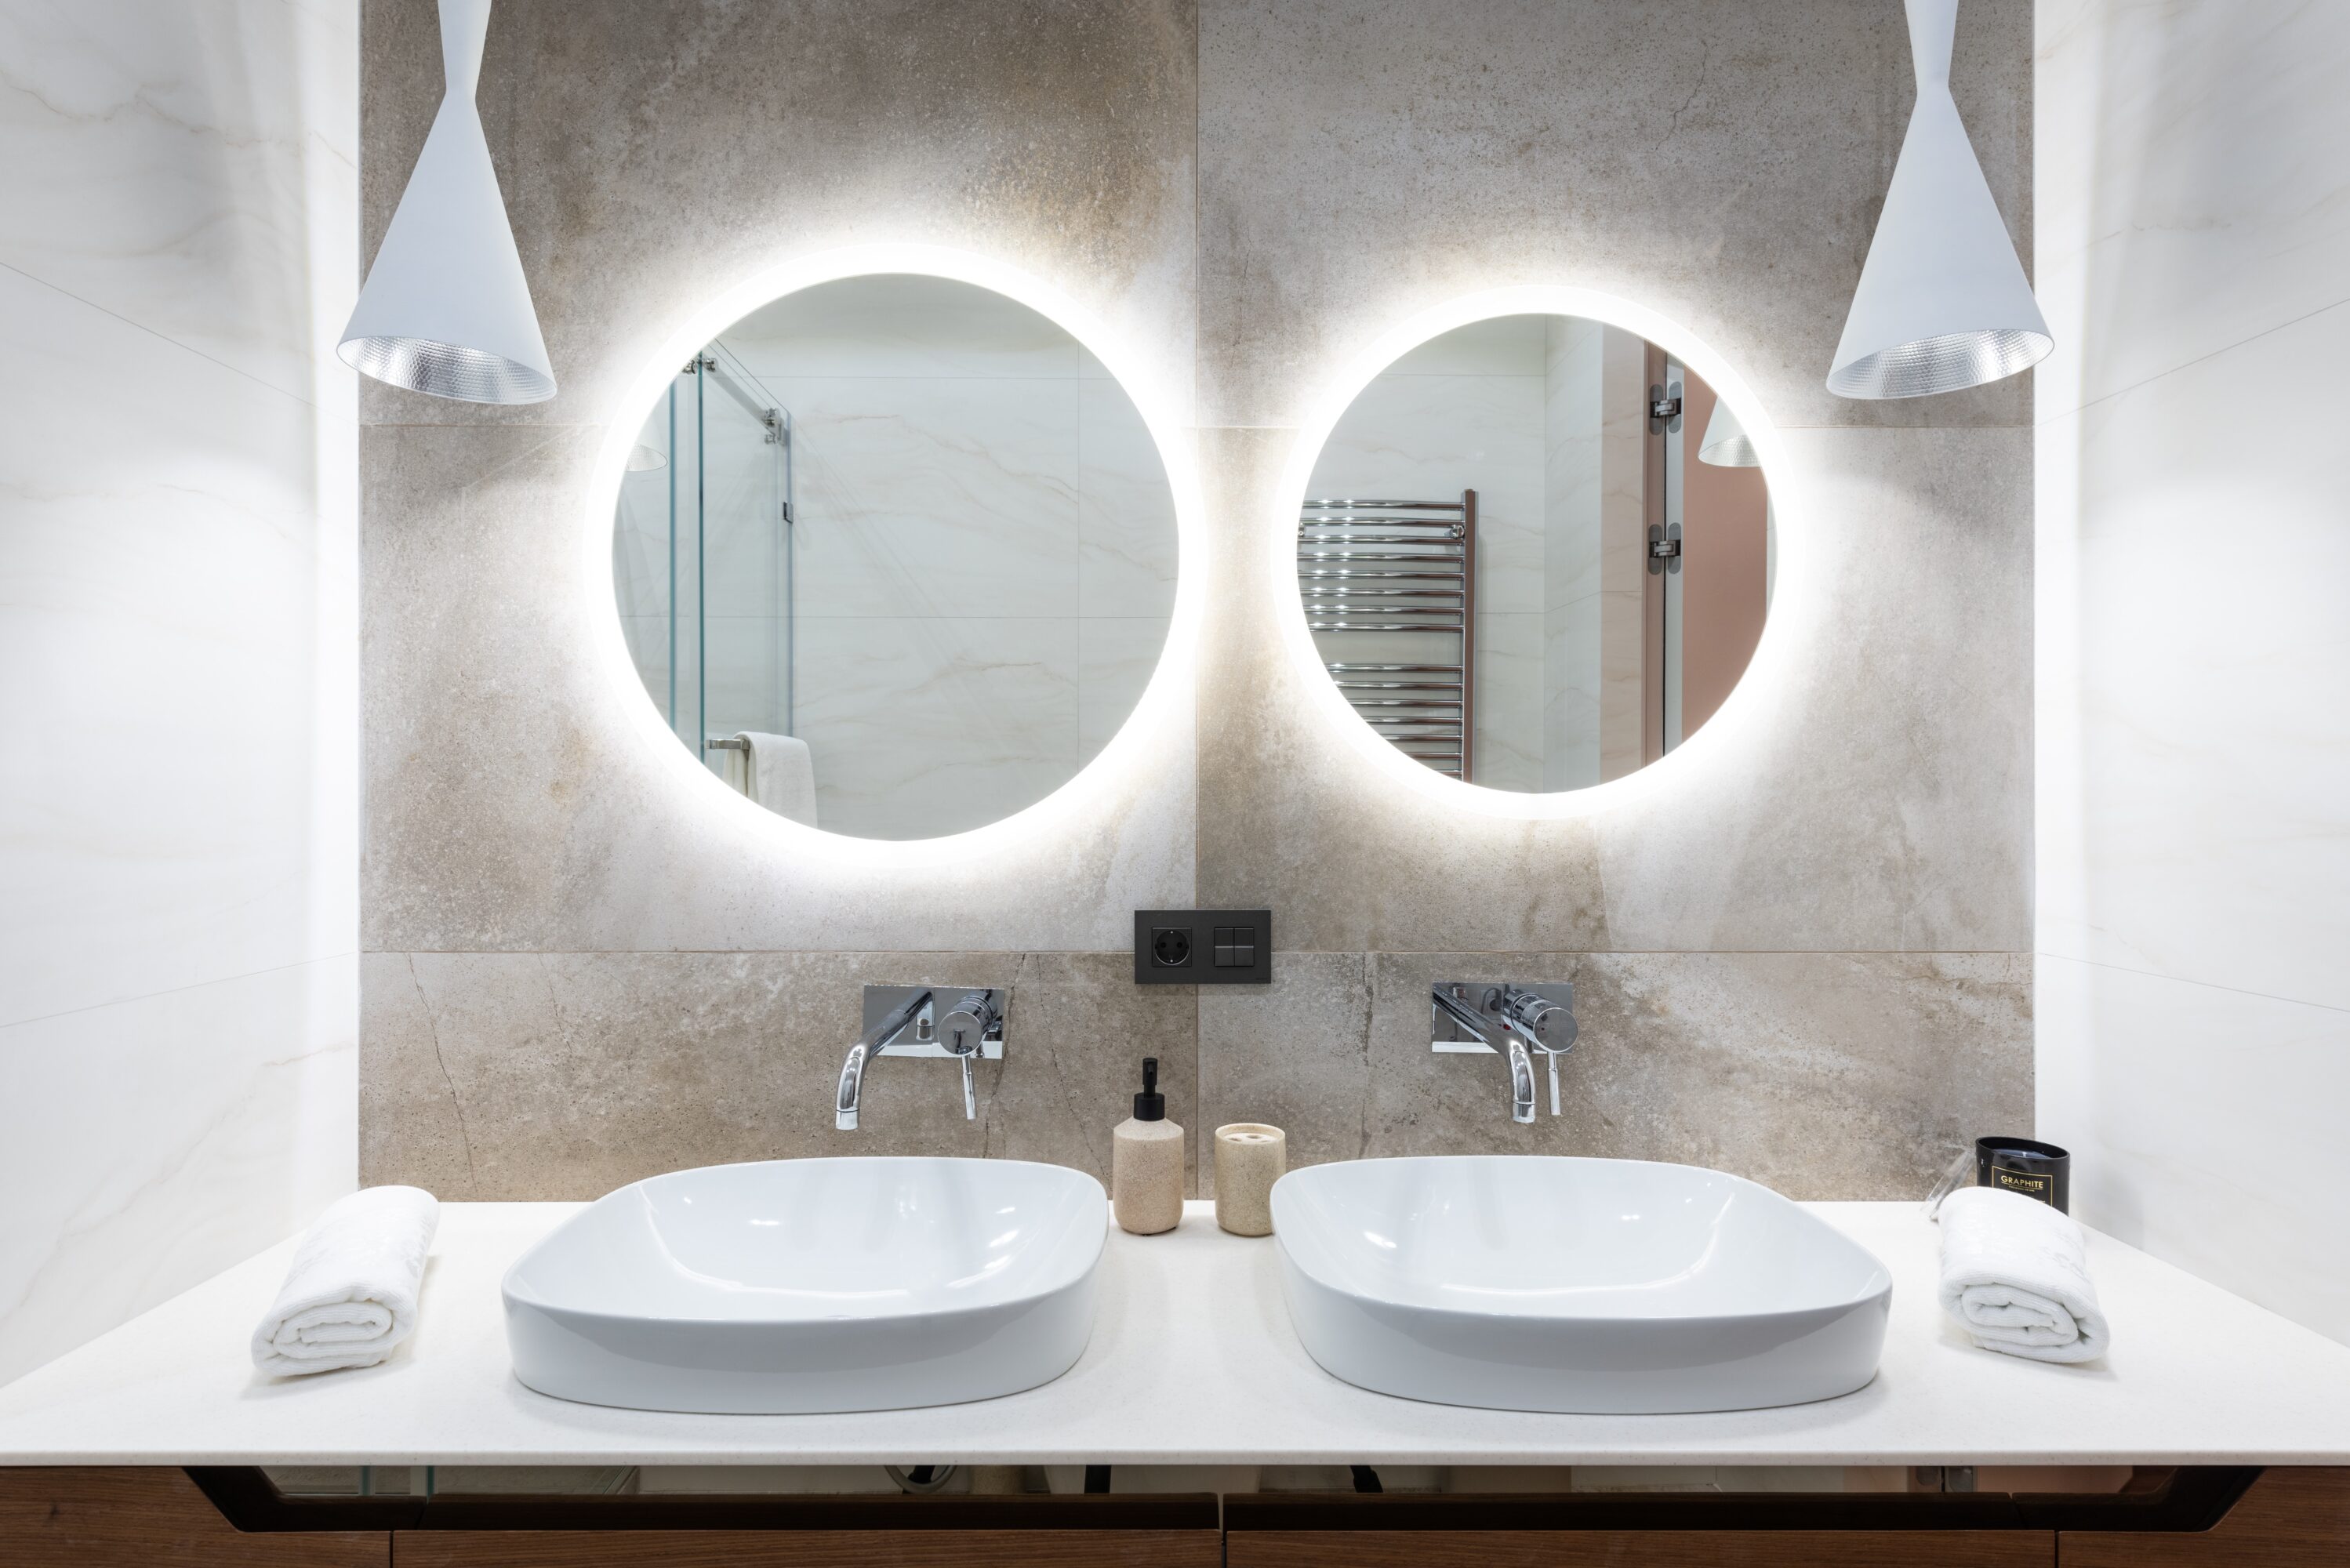 A beautiful, newly-remodeled bathroom with two sinks and two round mirrors